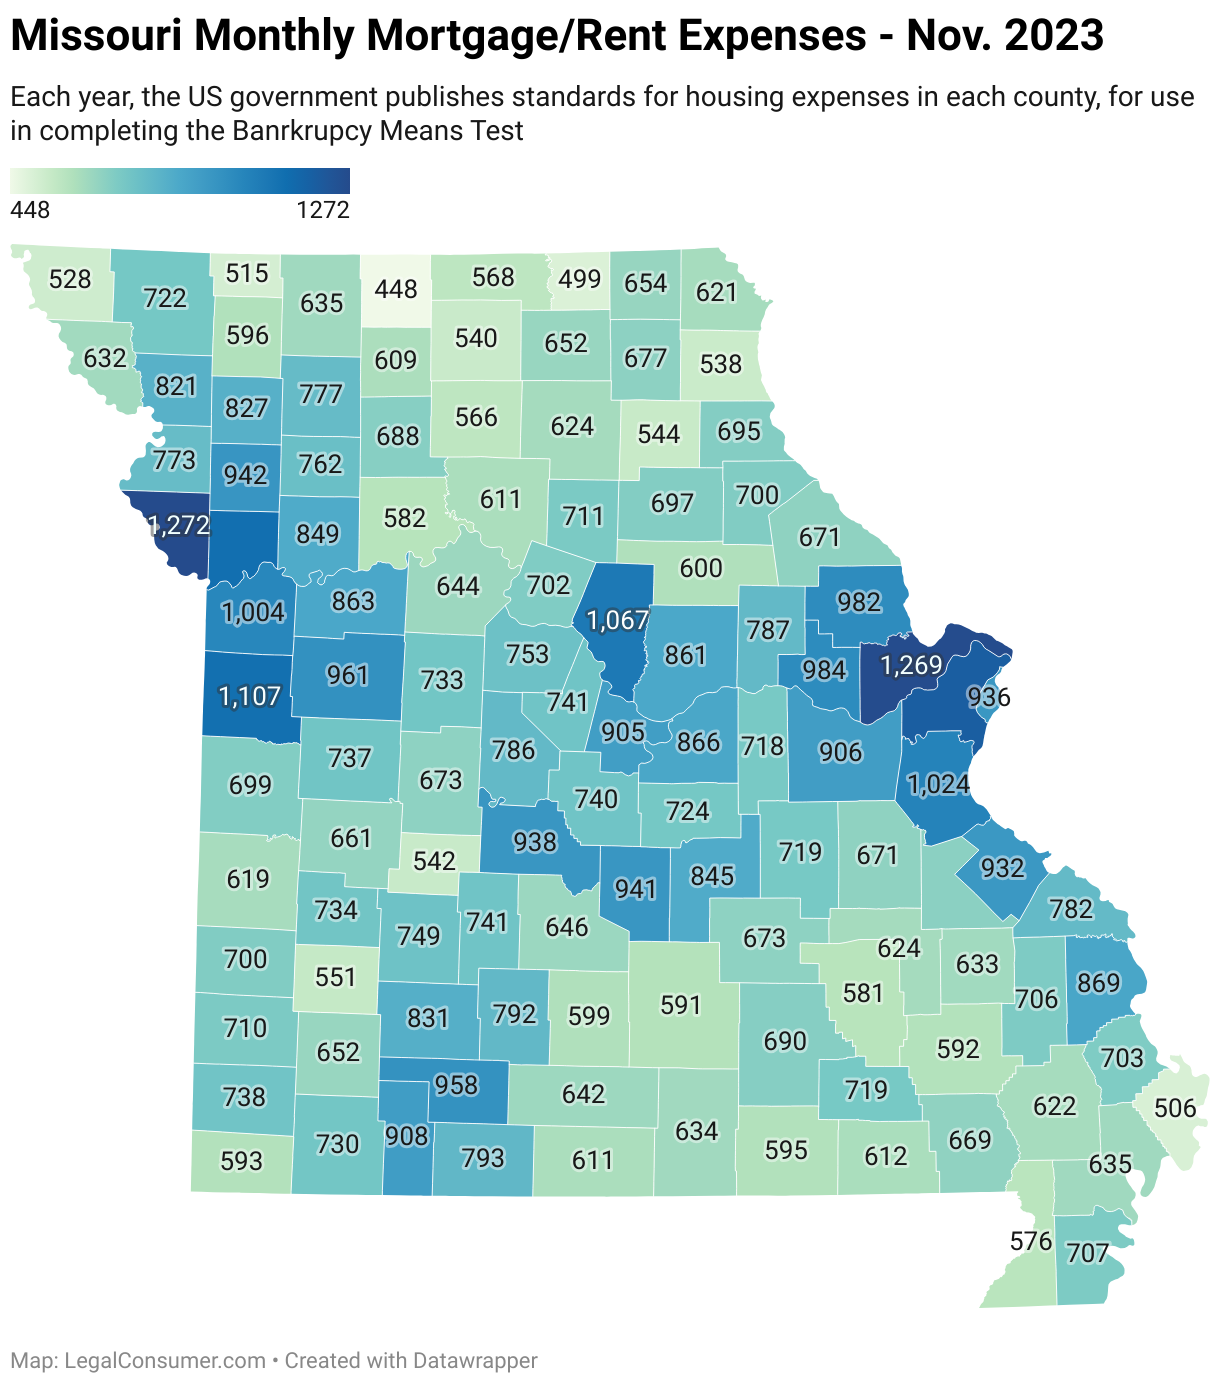 Map of Missouri Housing Expenses for Bankruptcy Means Test